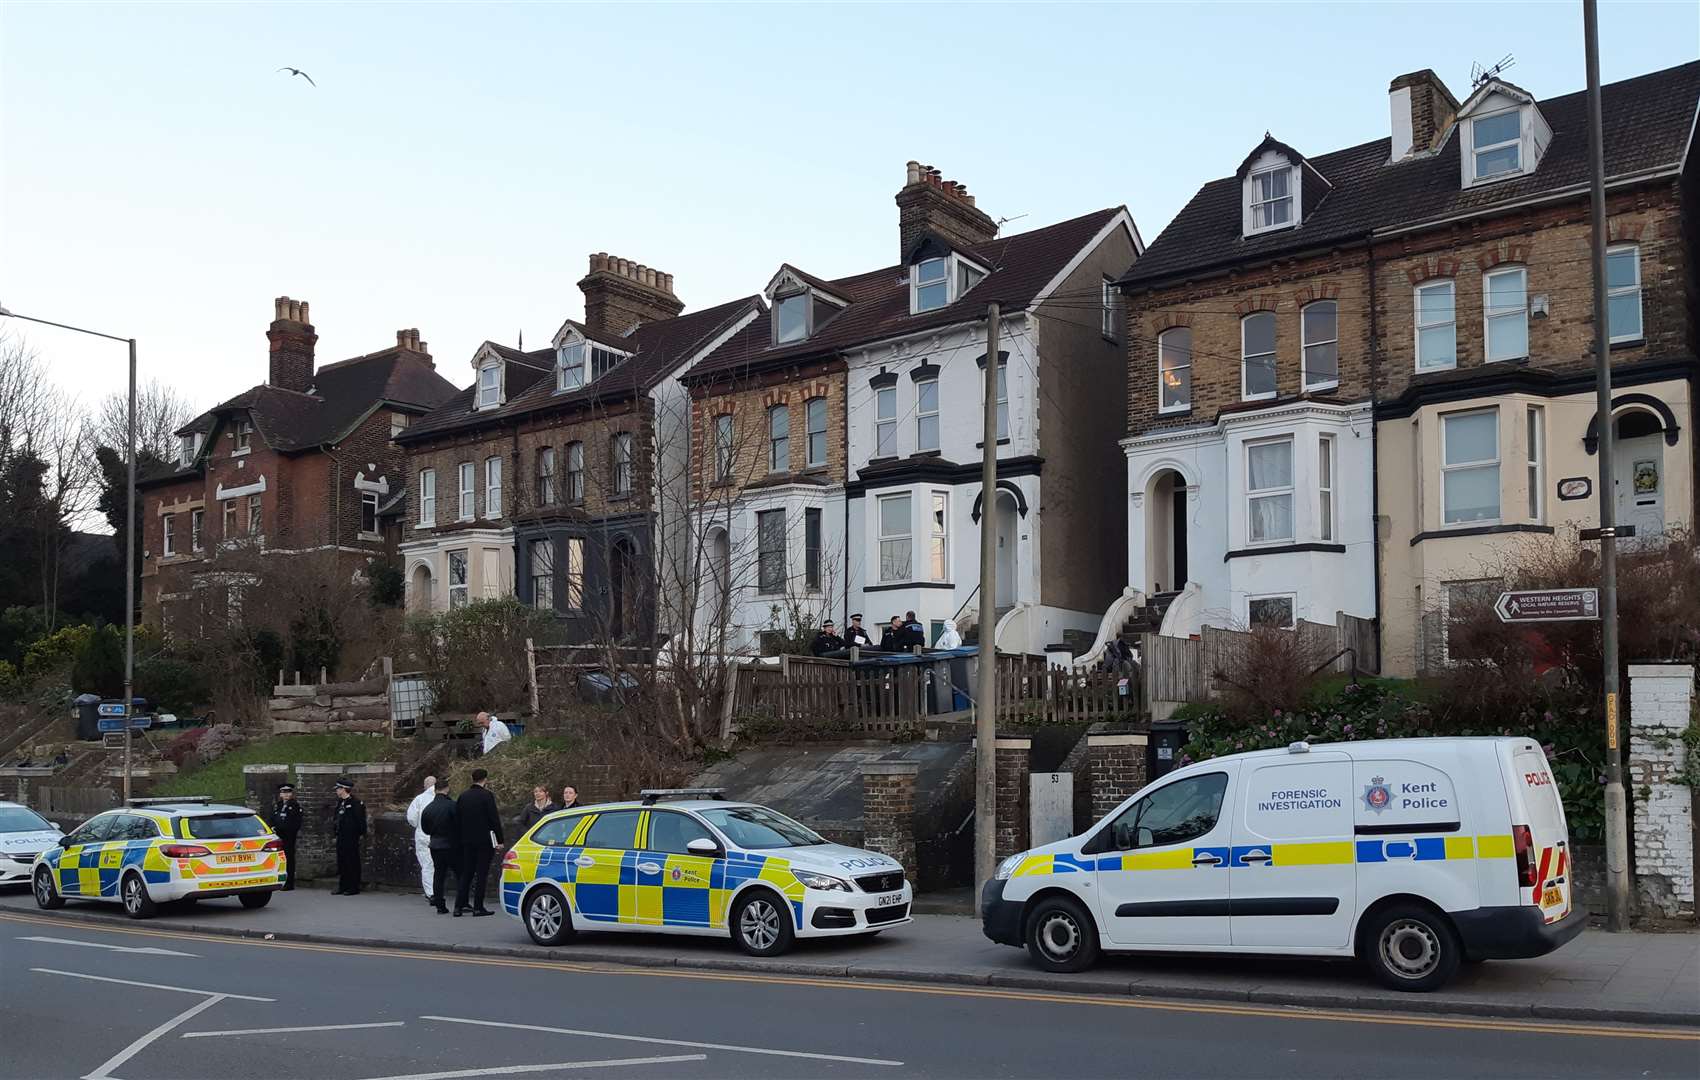 Police and forensic officers were spotted outside the house